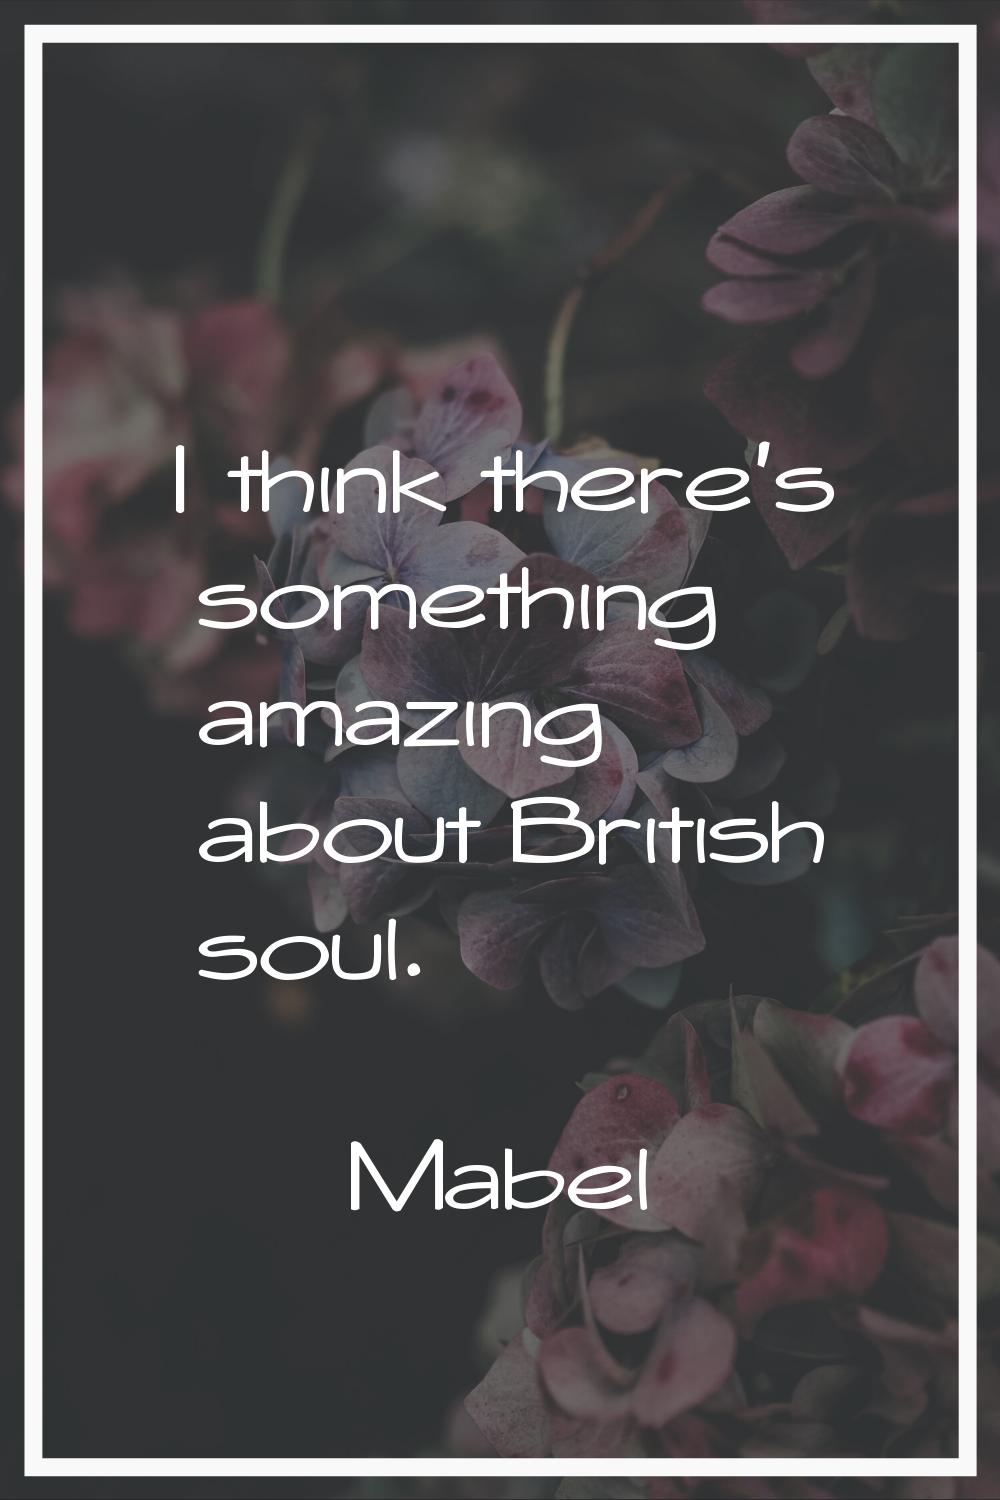 I think there's something amazing about British soul.